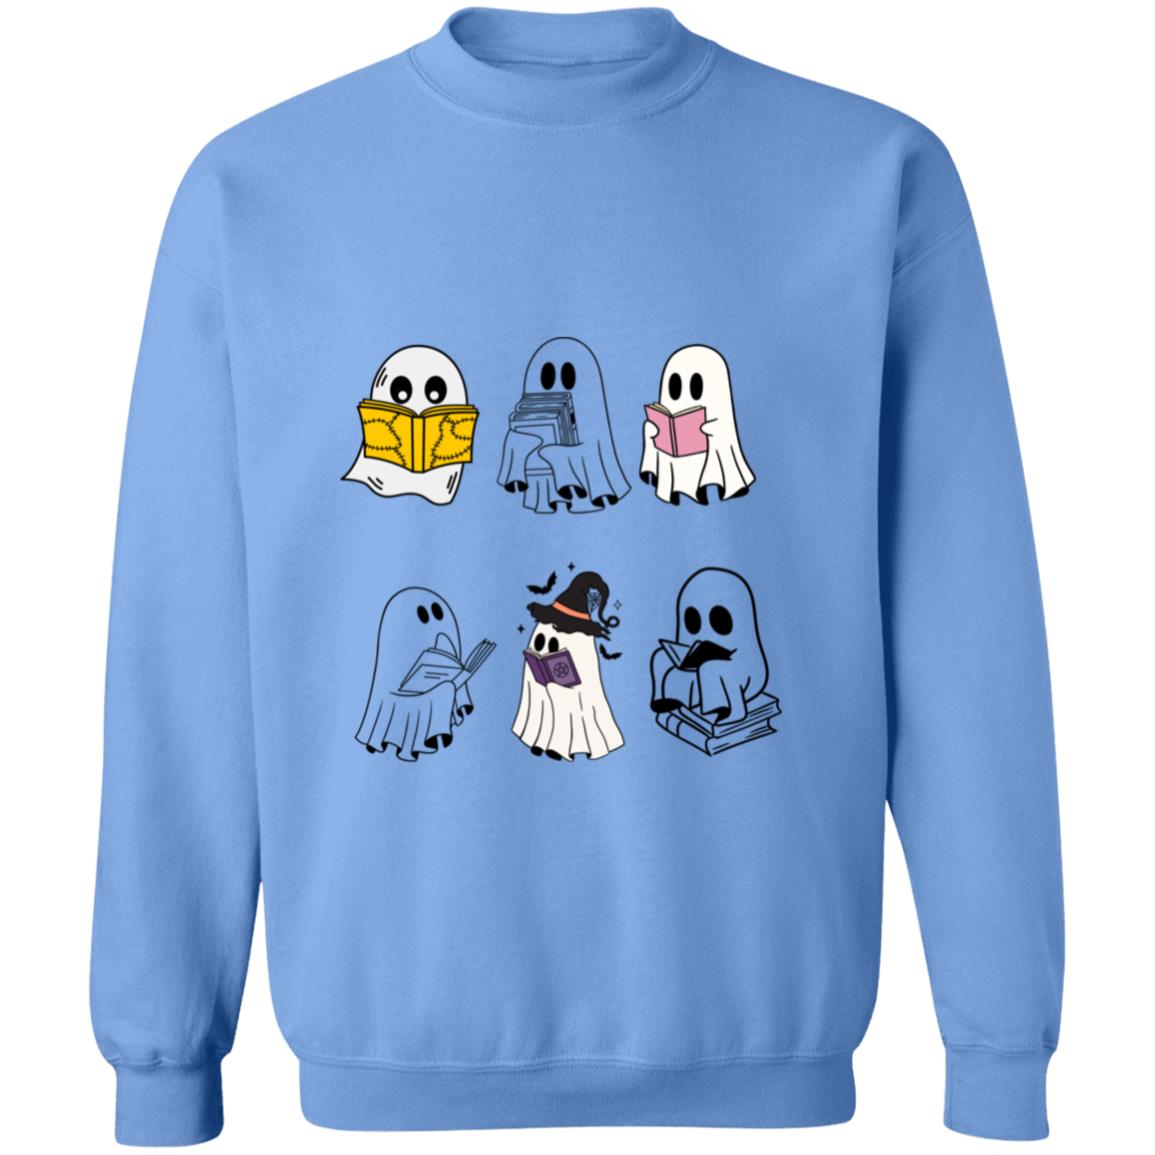 Get trendy with Reading Ghosts Sweatshirt - Sweatshirts available at Good Gift Company. Grab yours for $27.95 today!